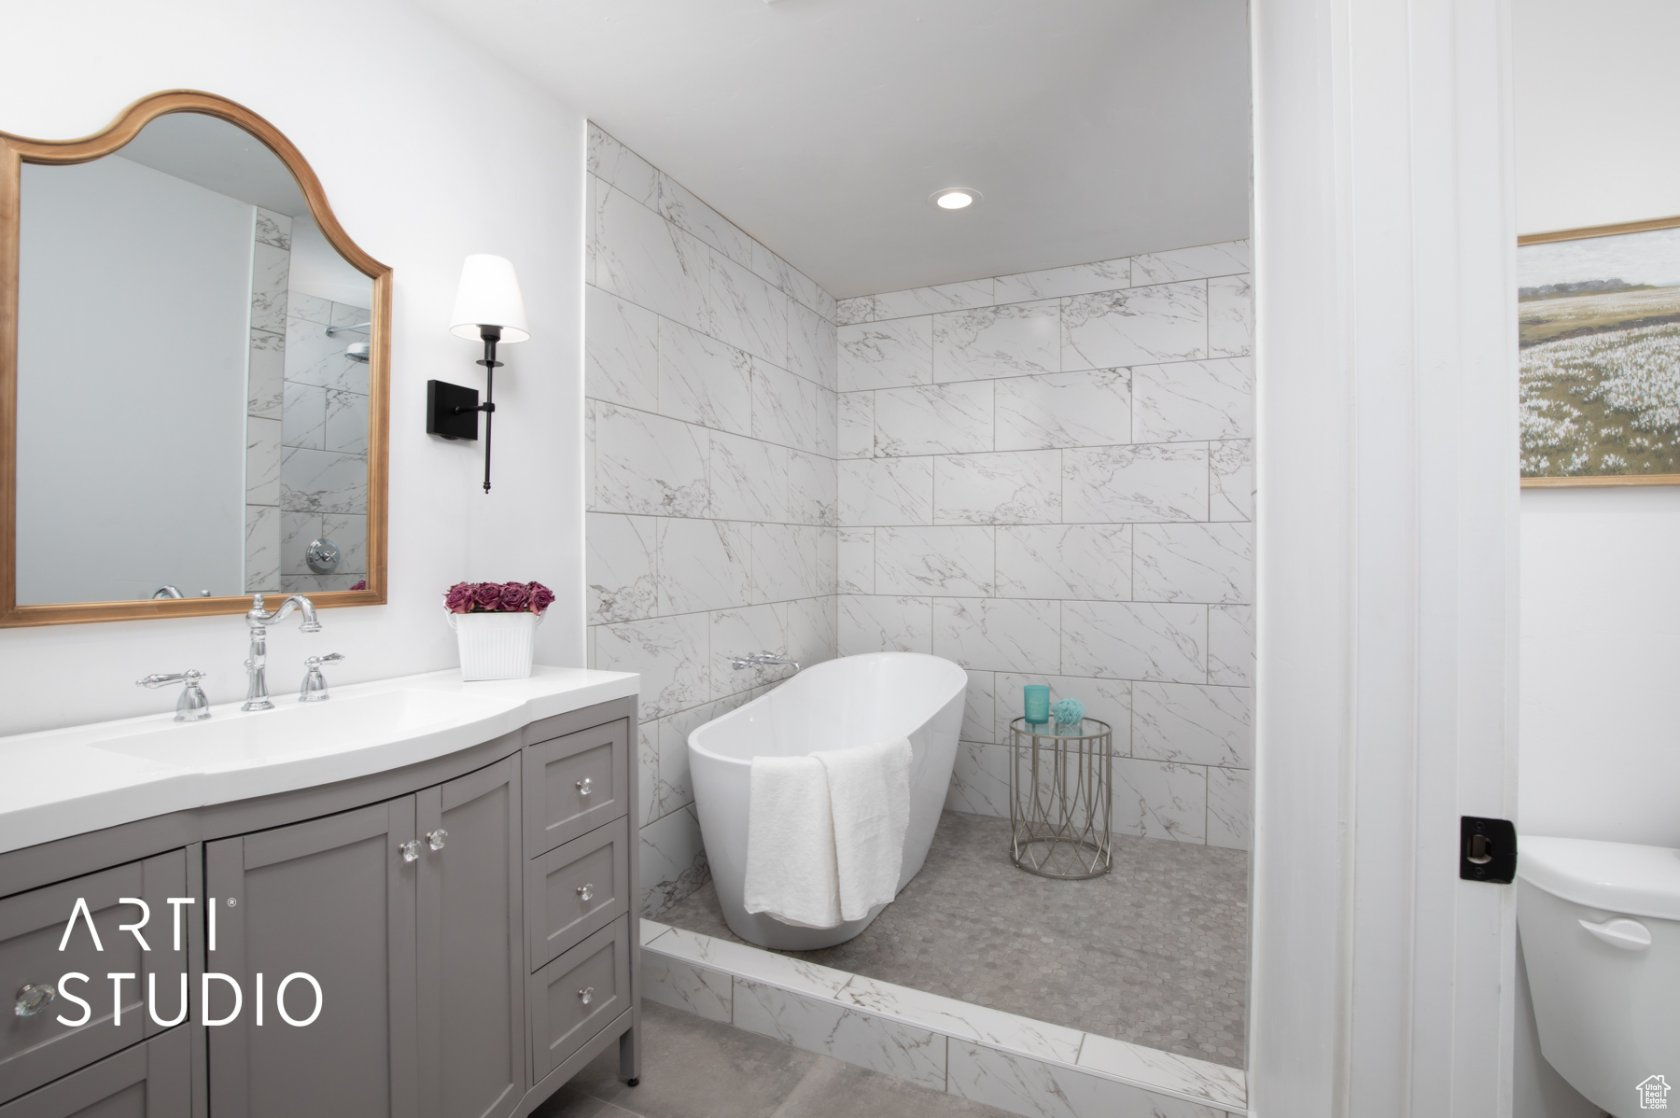 Bathroom featuring over sized tiled wetroom with tile walls and floor, toilet, and vanity